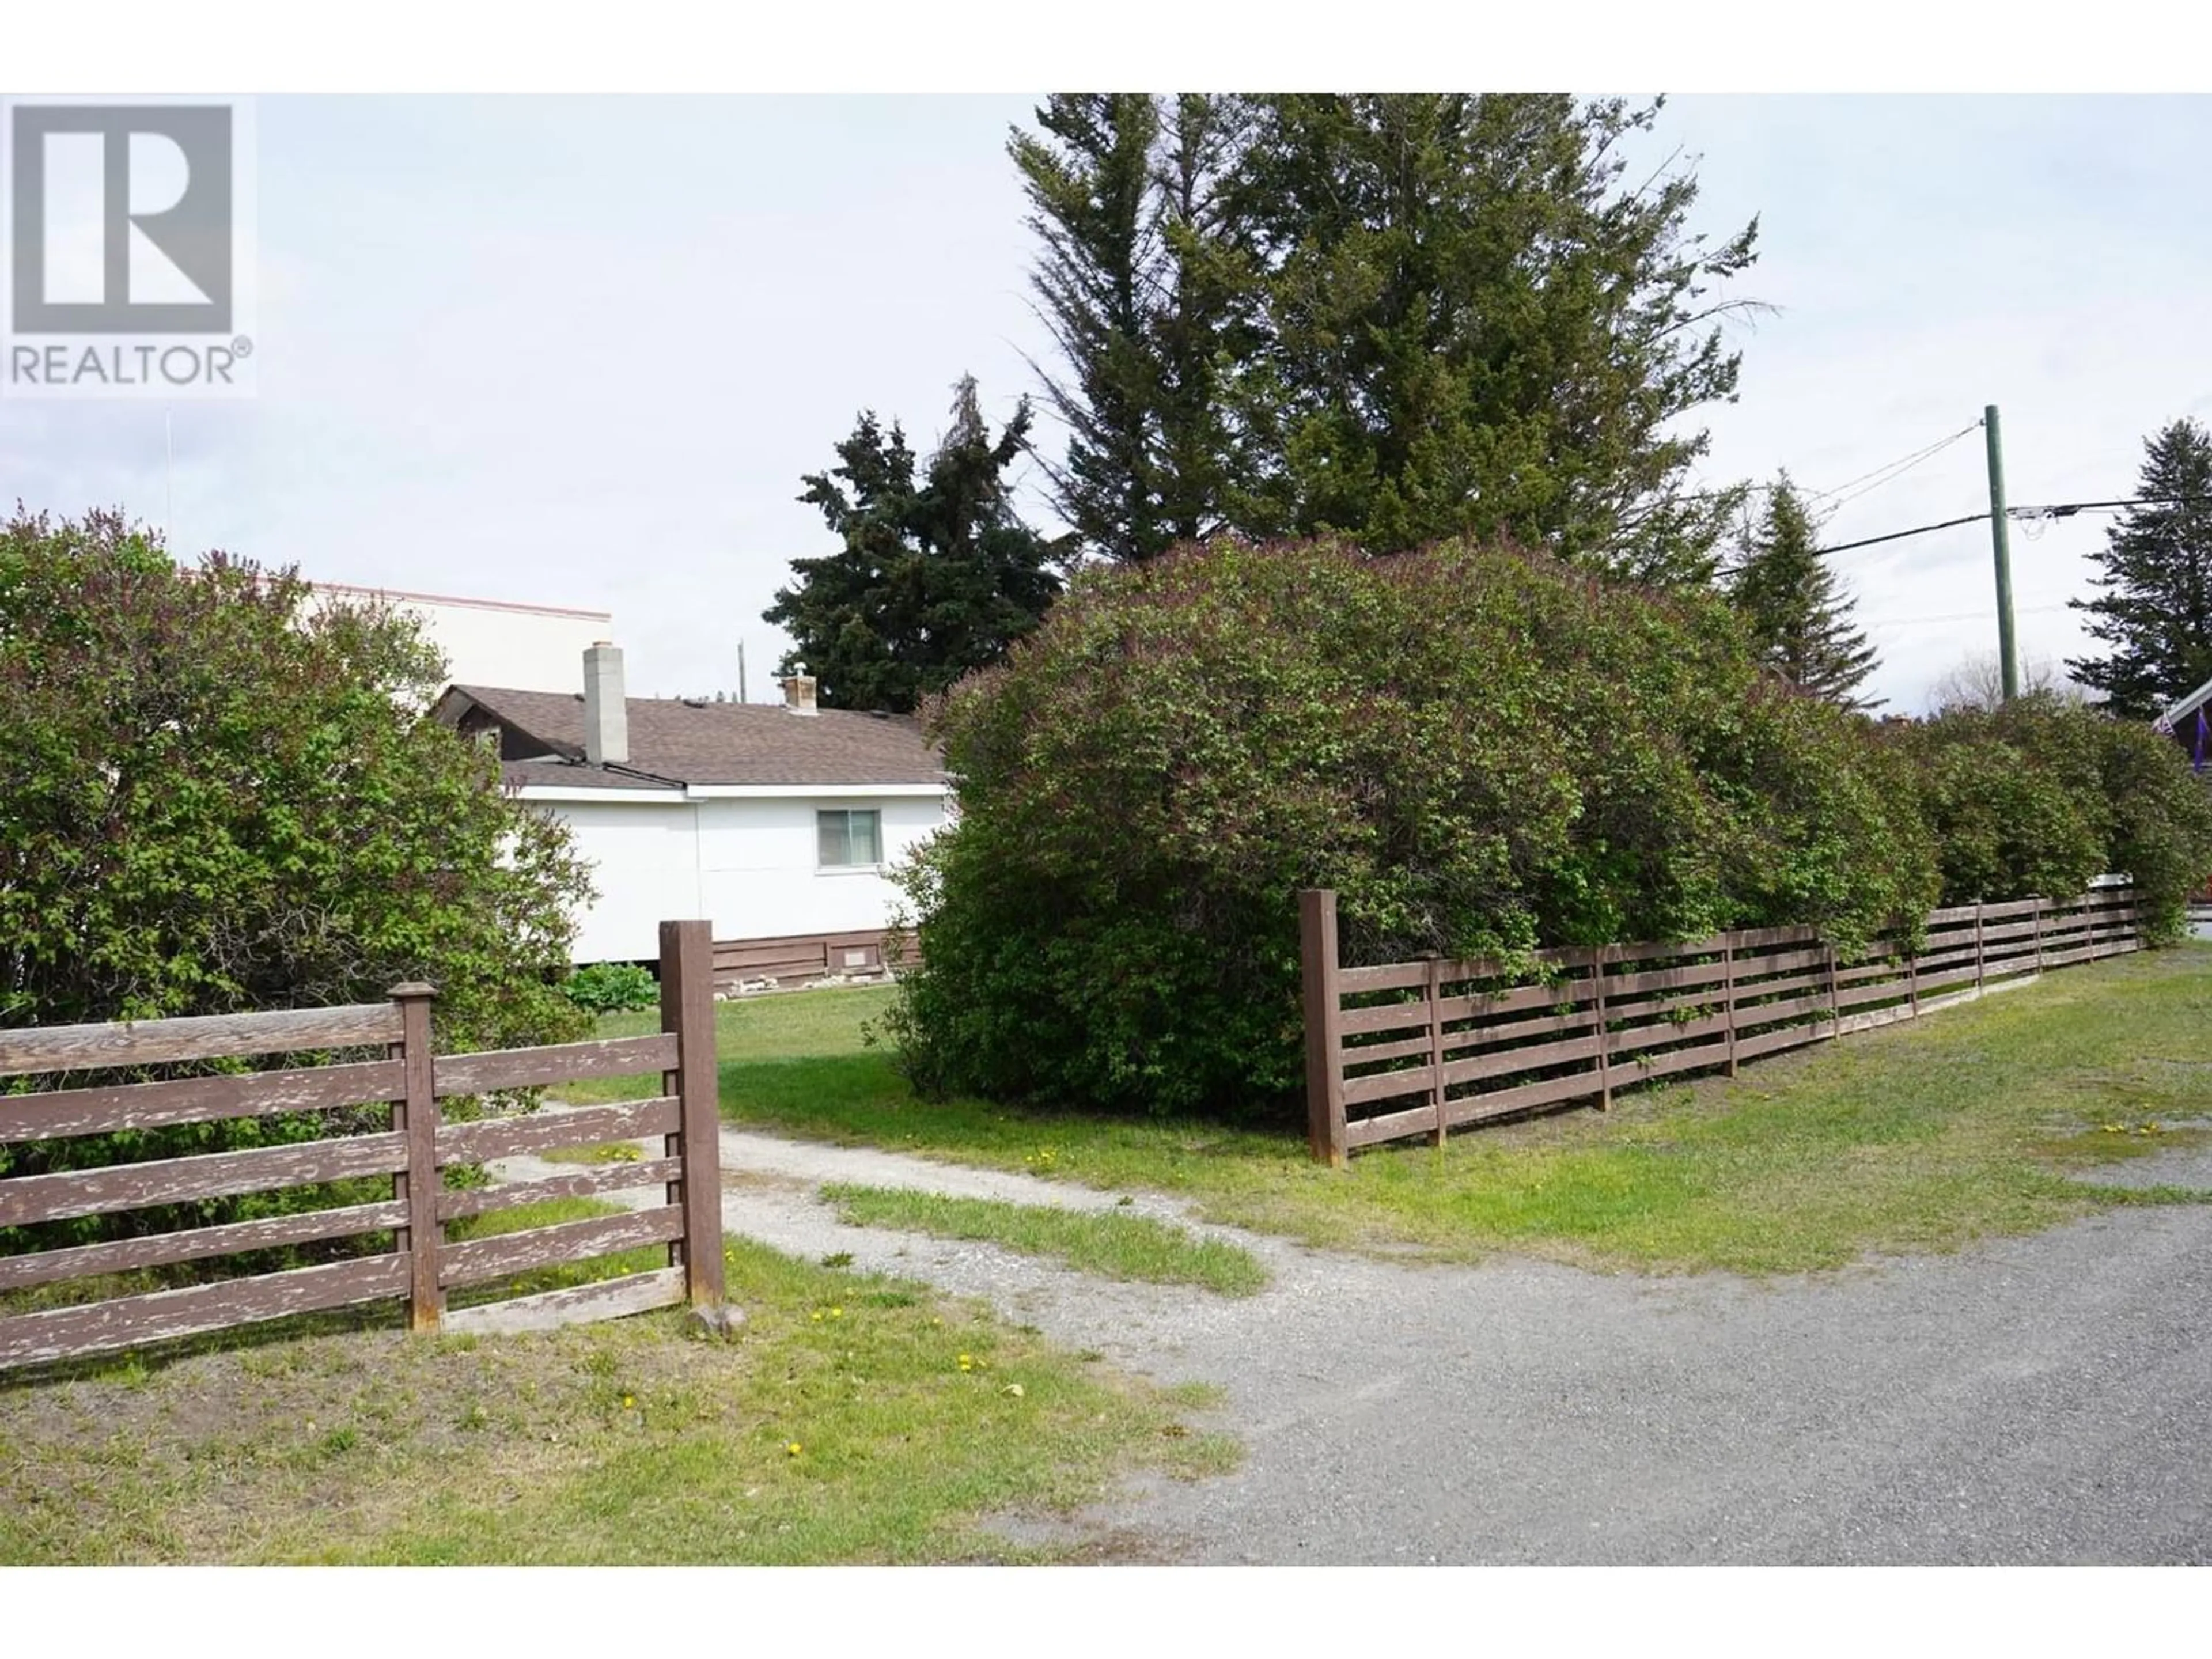 Fenced yard for 1430 GOVERNMENT STREET, Clinton British Columbia V0K1K0